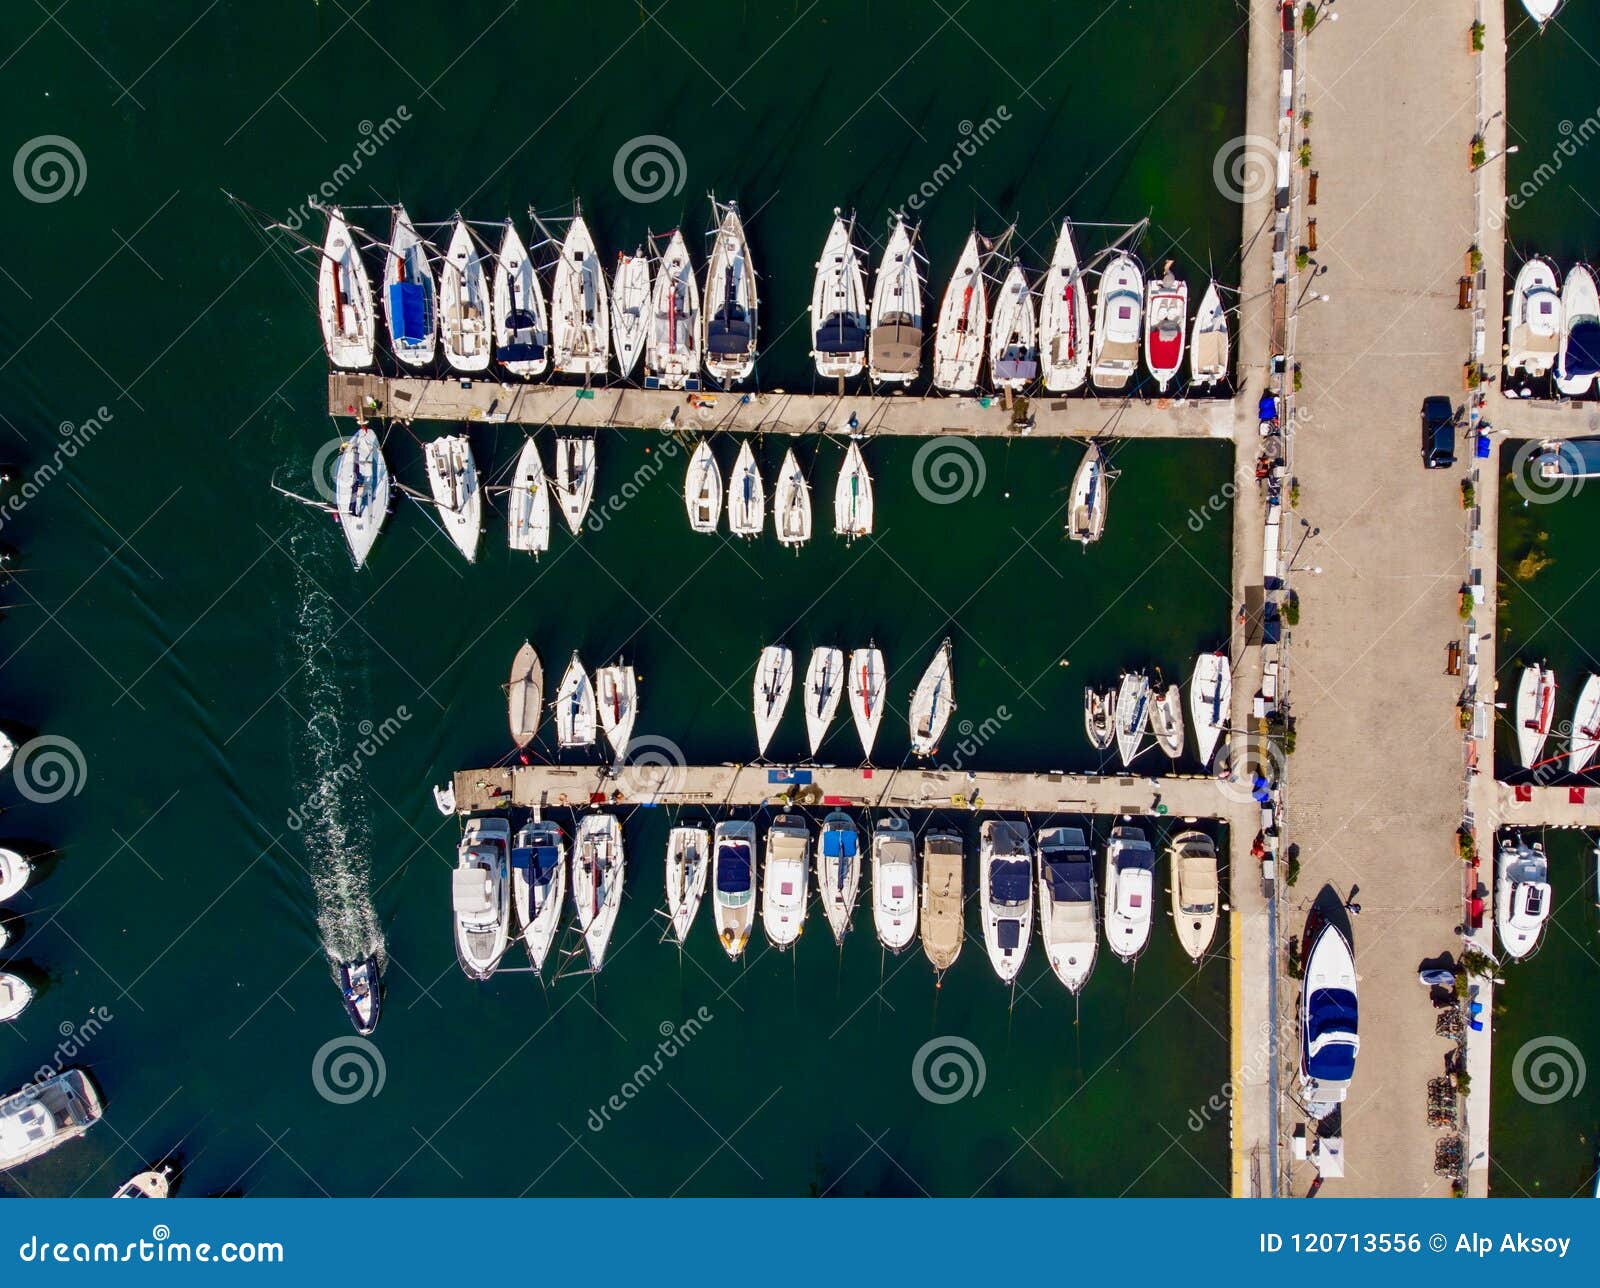 aerial drone view of marina with sailboats and motor boats docked in pier.